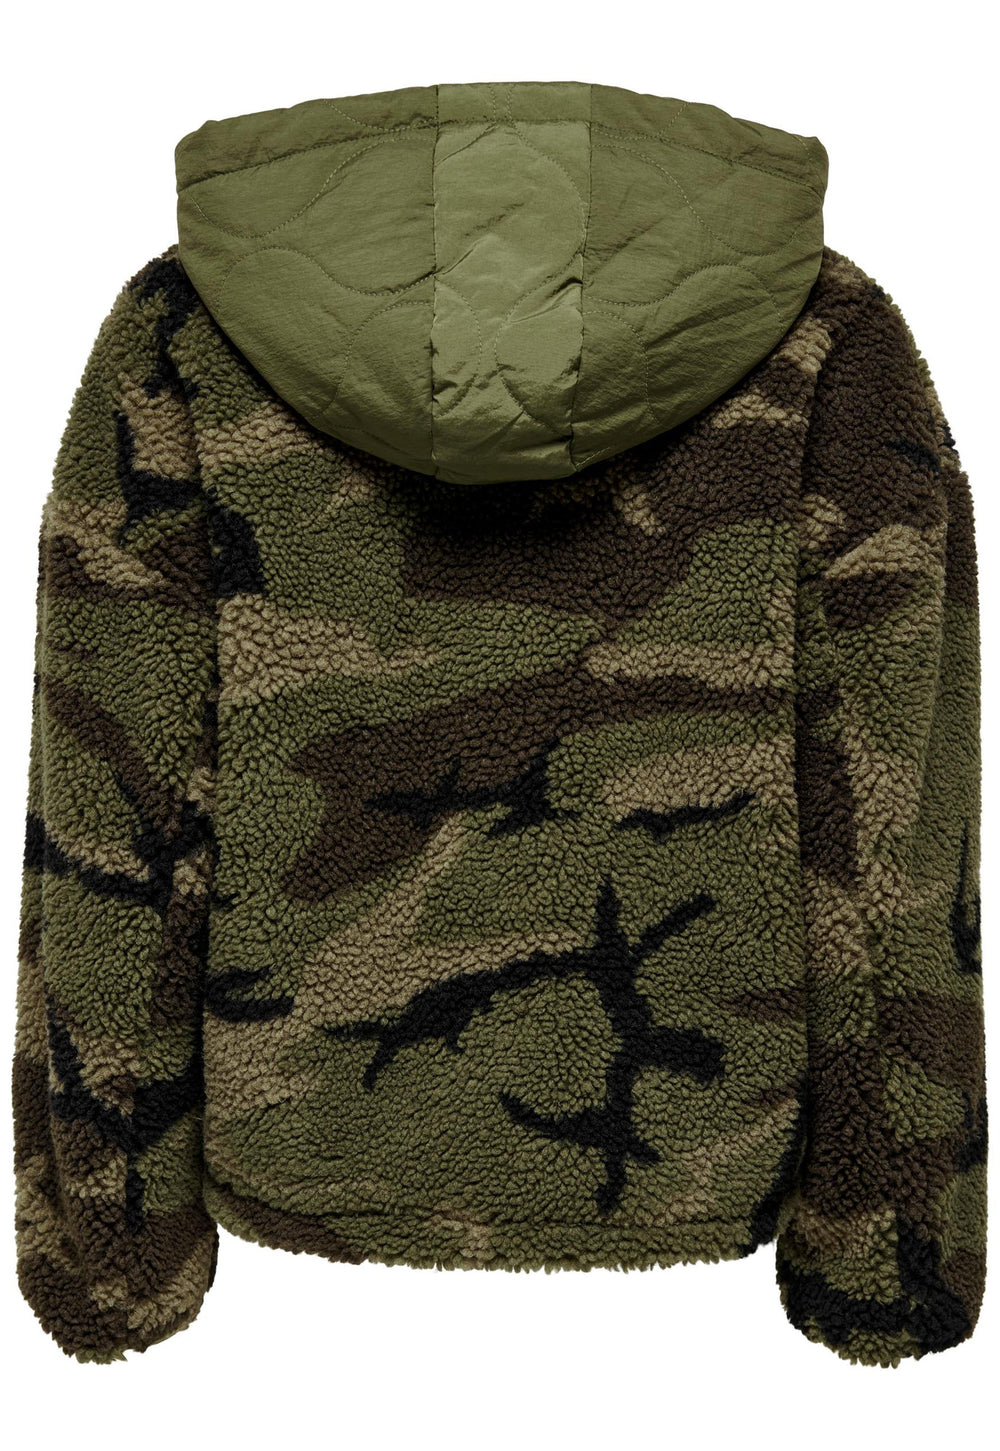 ONLY Vilma Short Print Teddy Fleece Jacket with Hood in Khaki Tones | One Nation Clothing ONLY Short Camo Print Teddy Fleece Jacket with in Khaki Ton